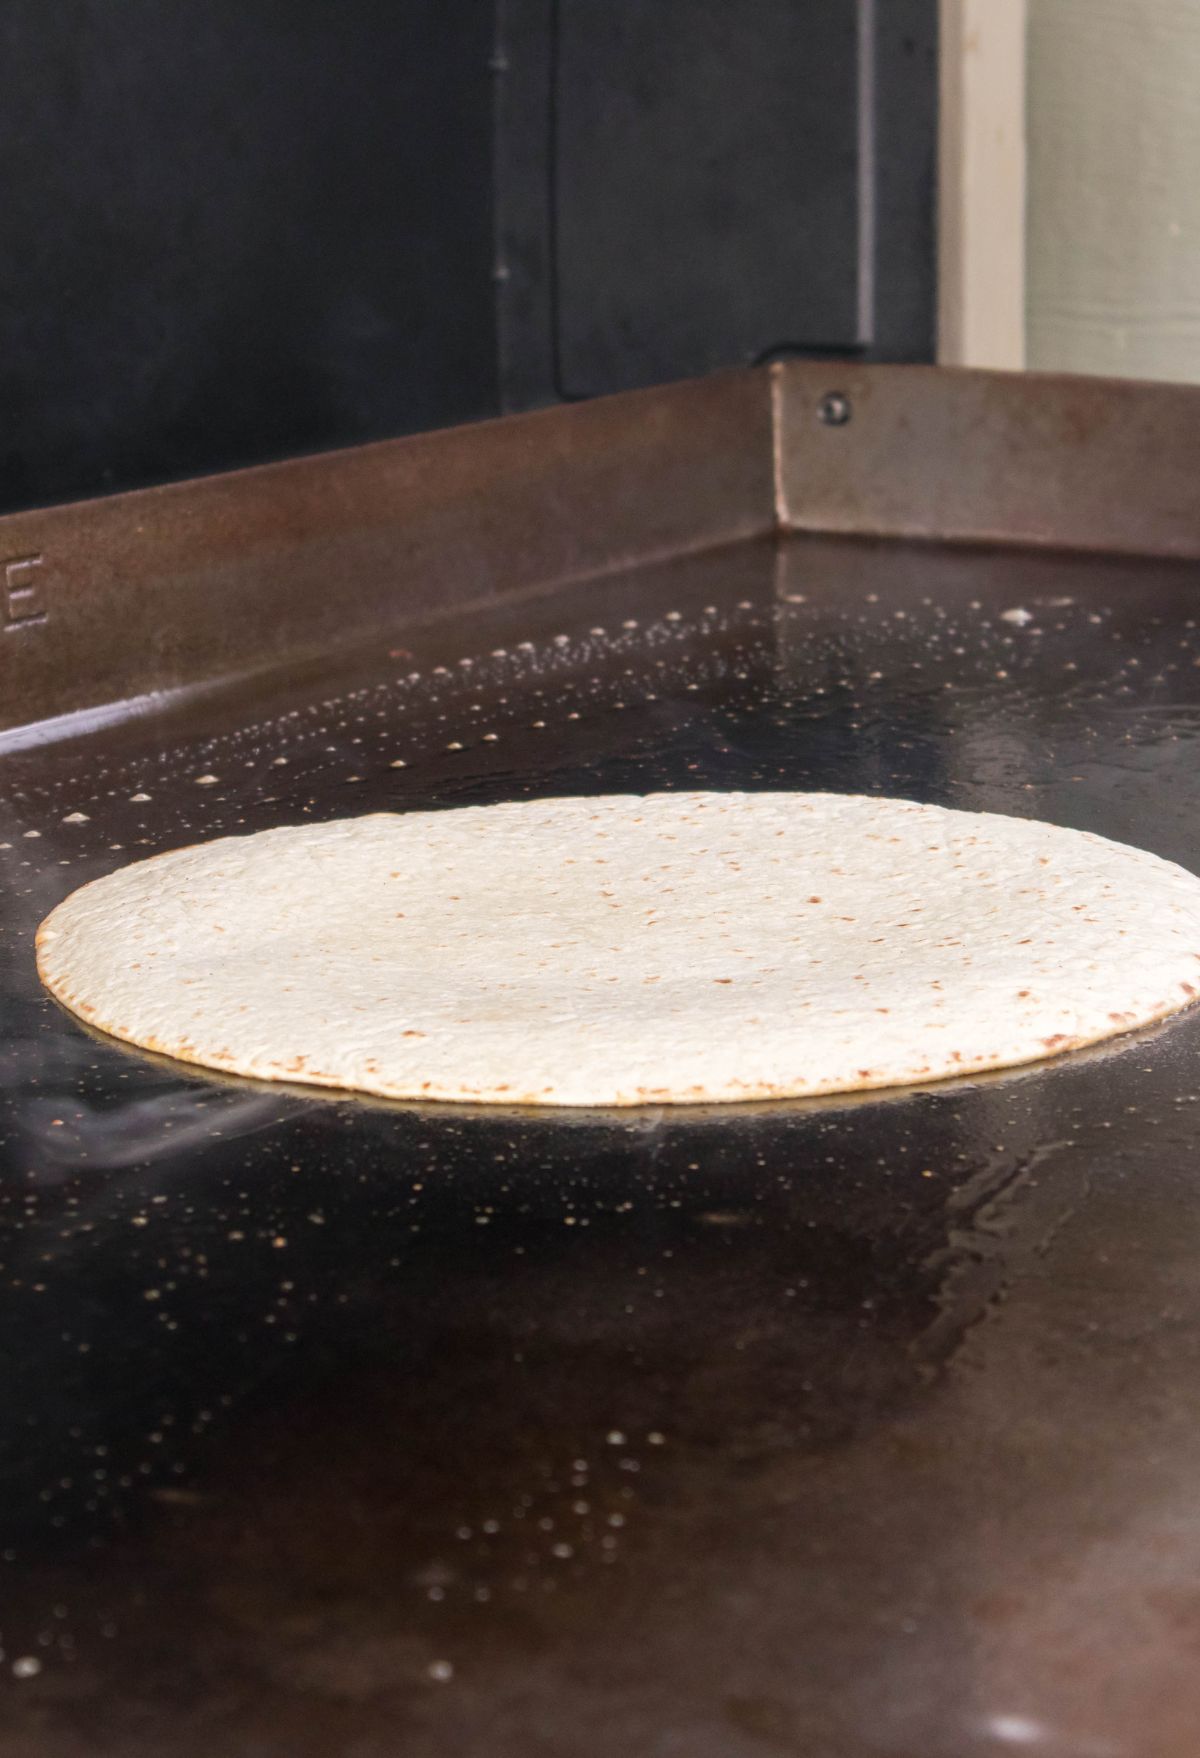 A tortilla cooking on a large, heated flat griddle, with visible steam rising from its surface.